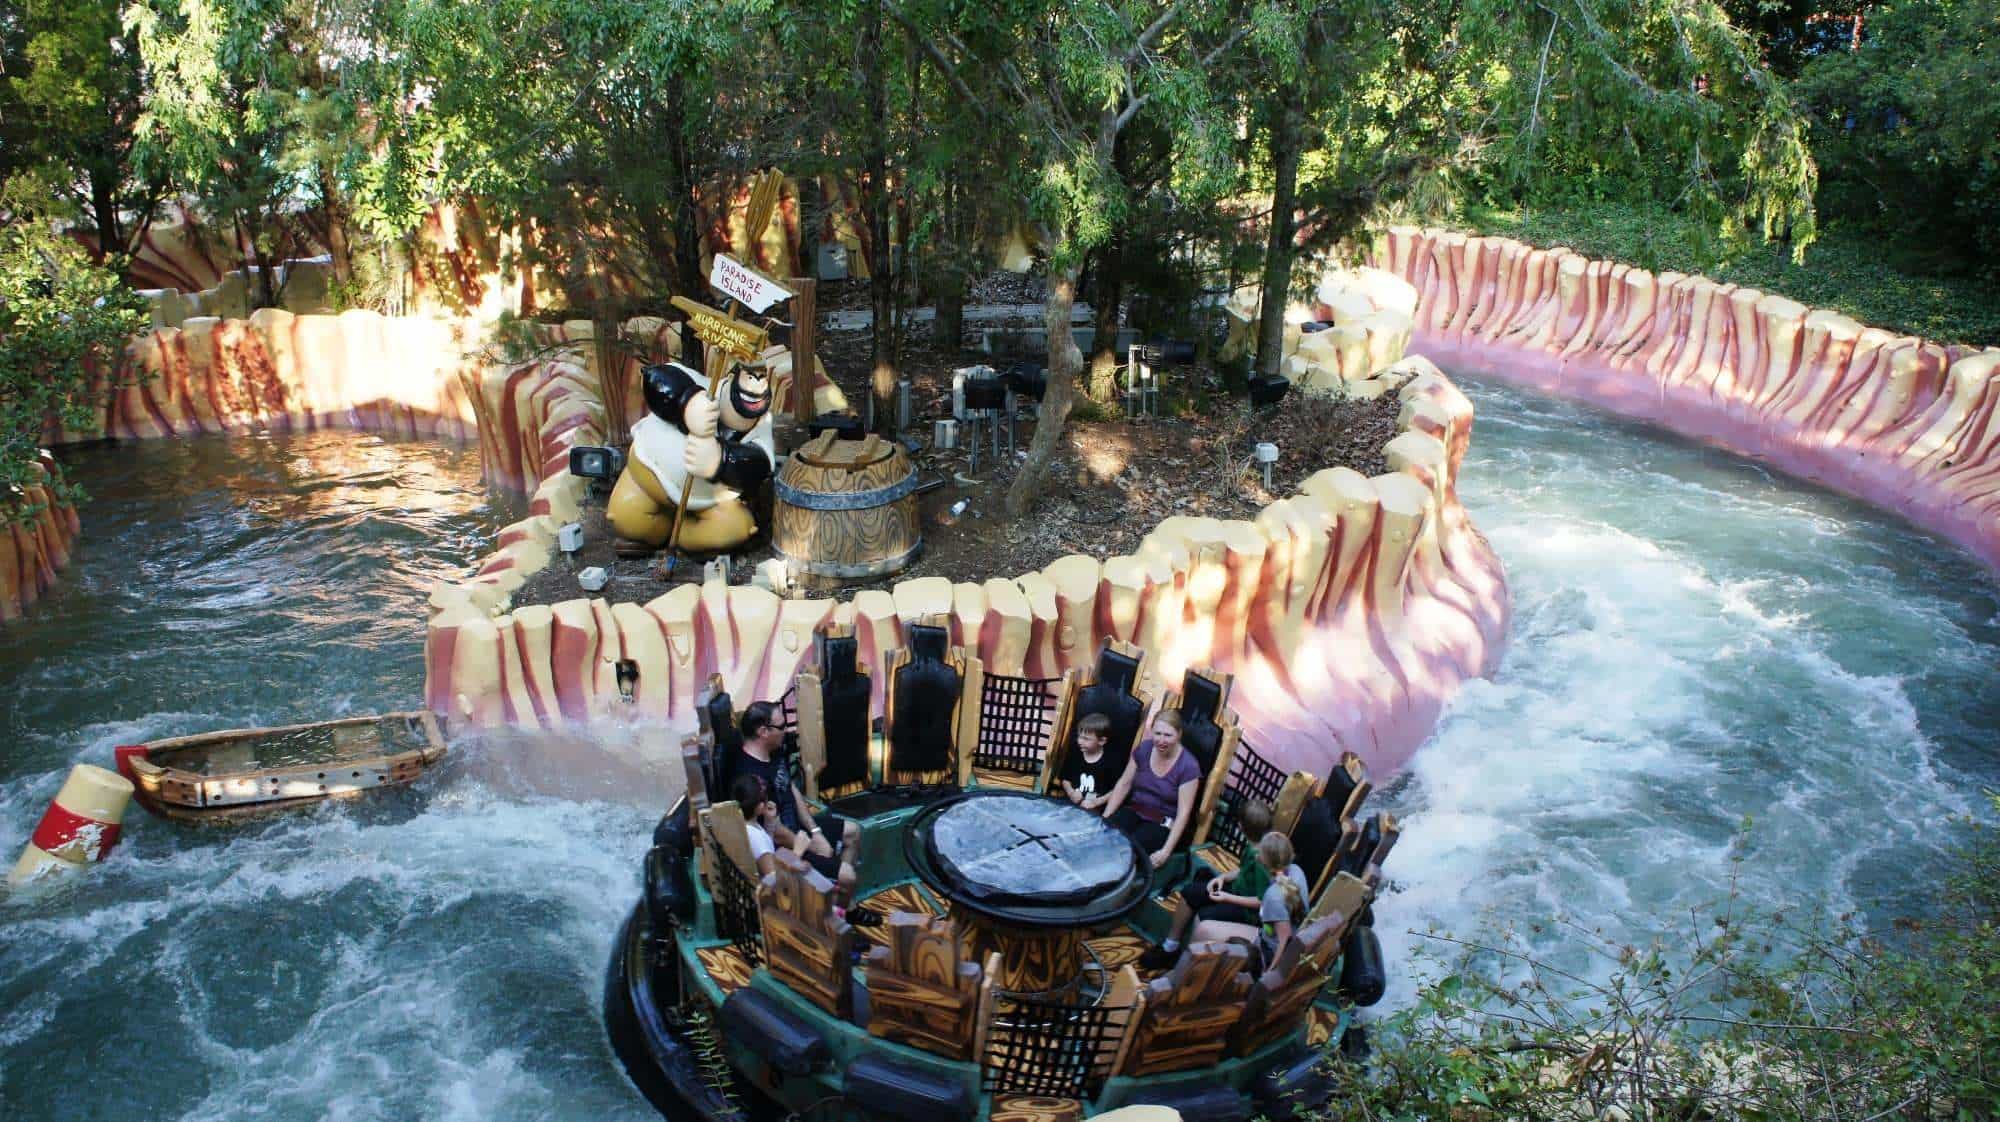 An eight-person raft navigates the rapids of Popeye and Bluto's Bilge-Rat Barges.